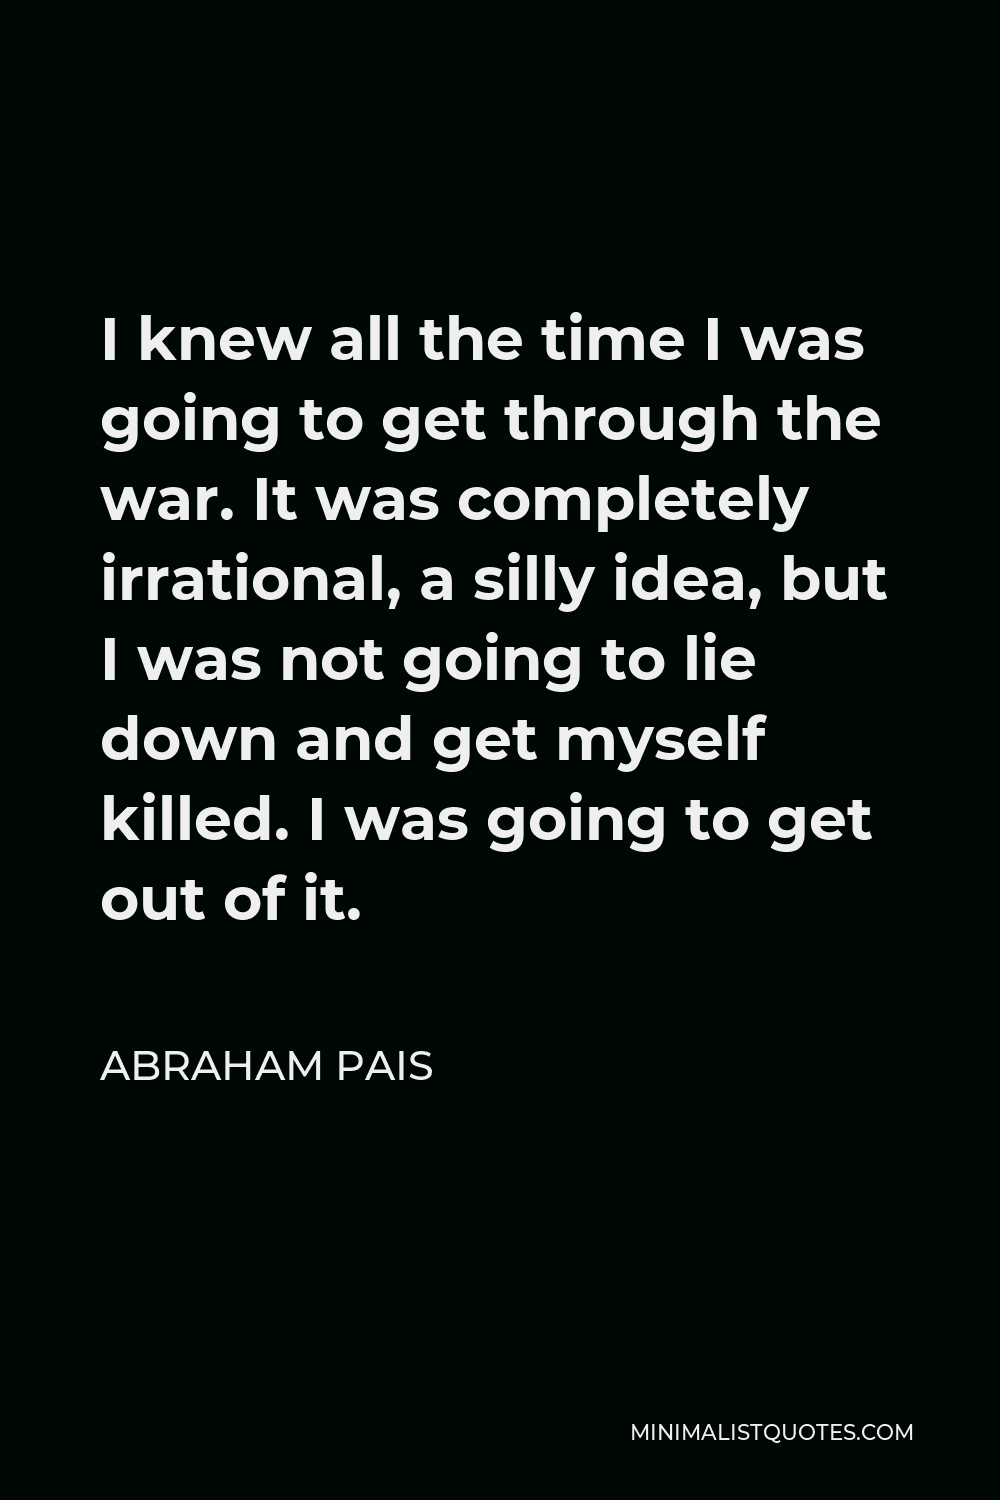 Abraham Pais Quote - I knew all the time I was going to get through the war. It was completely irrational, a silly idea, but I was not going to lie down and get myself killed. I was going to get out of it.